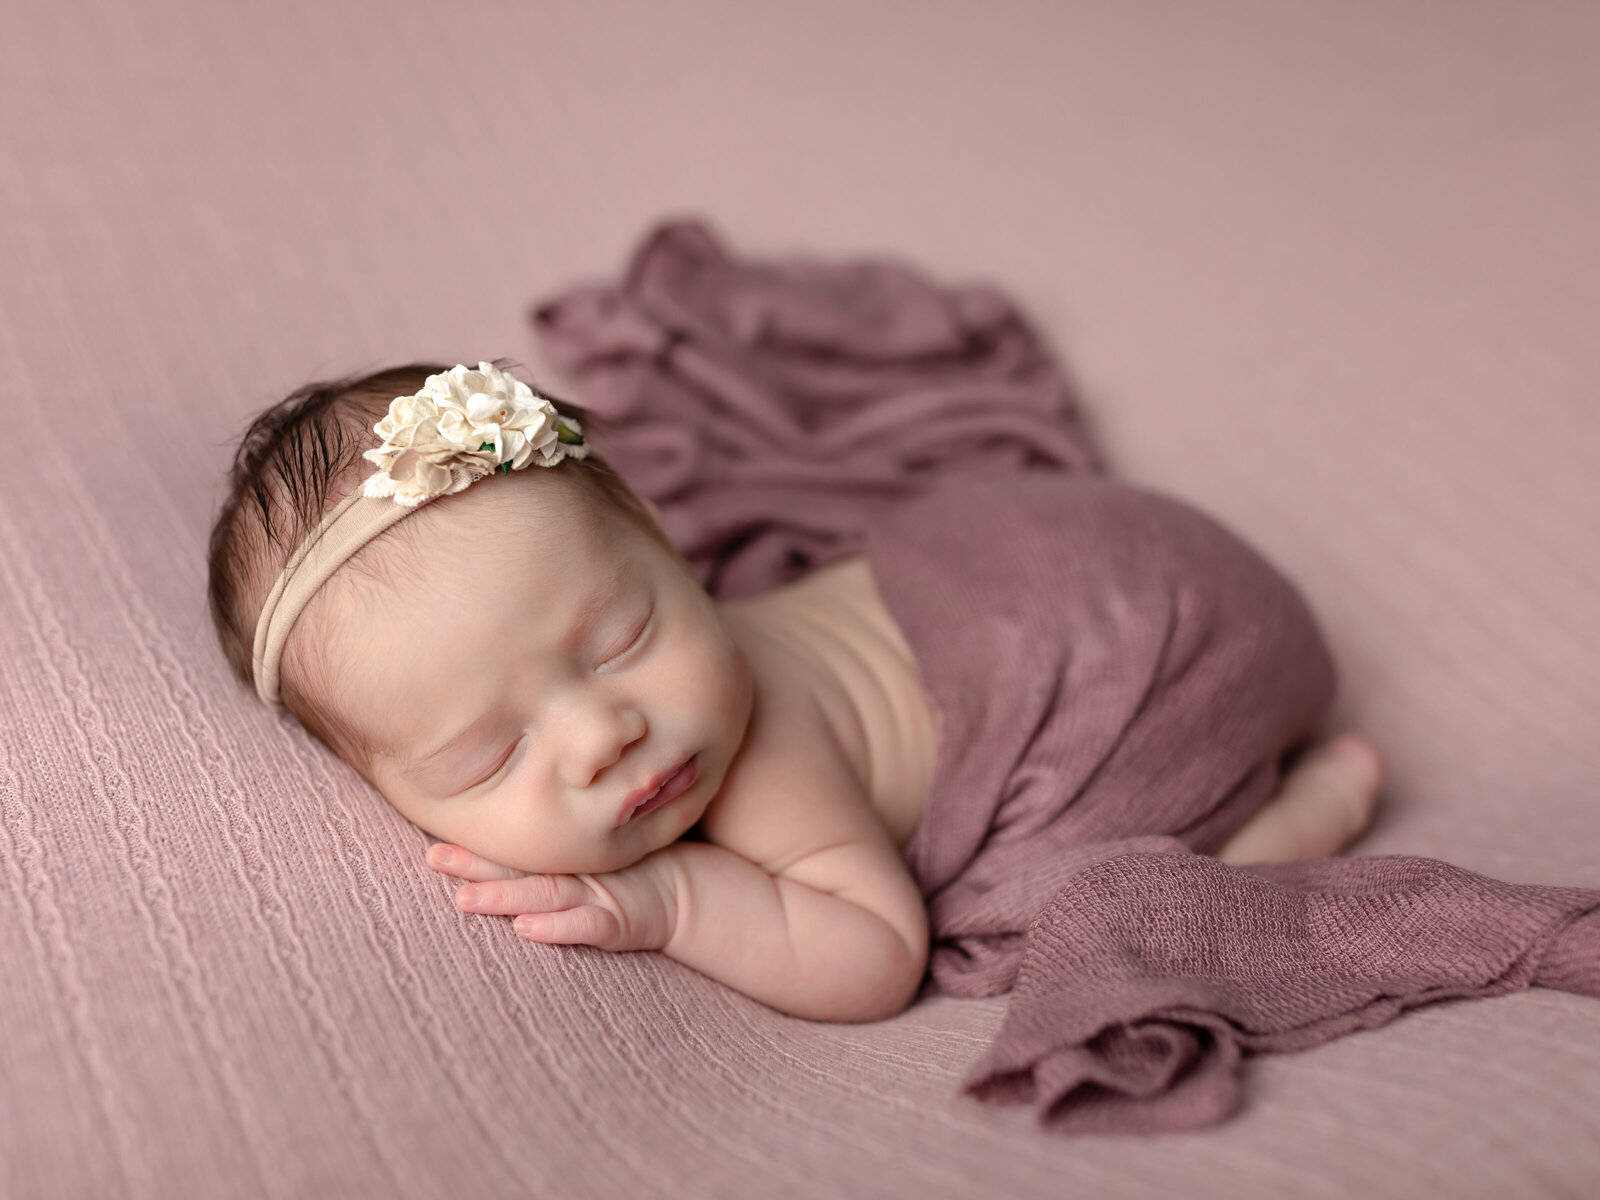 newborn baby girl laying on pink fabric for photoshoot